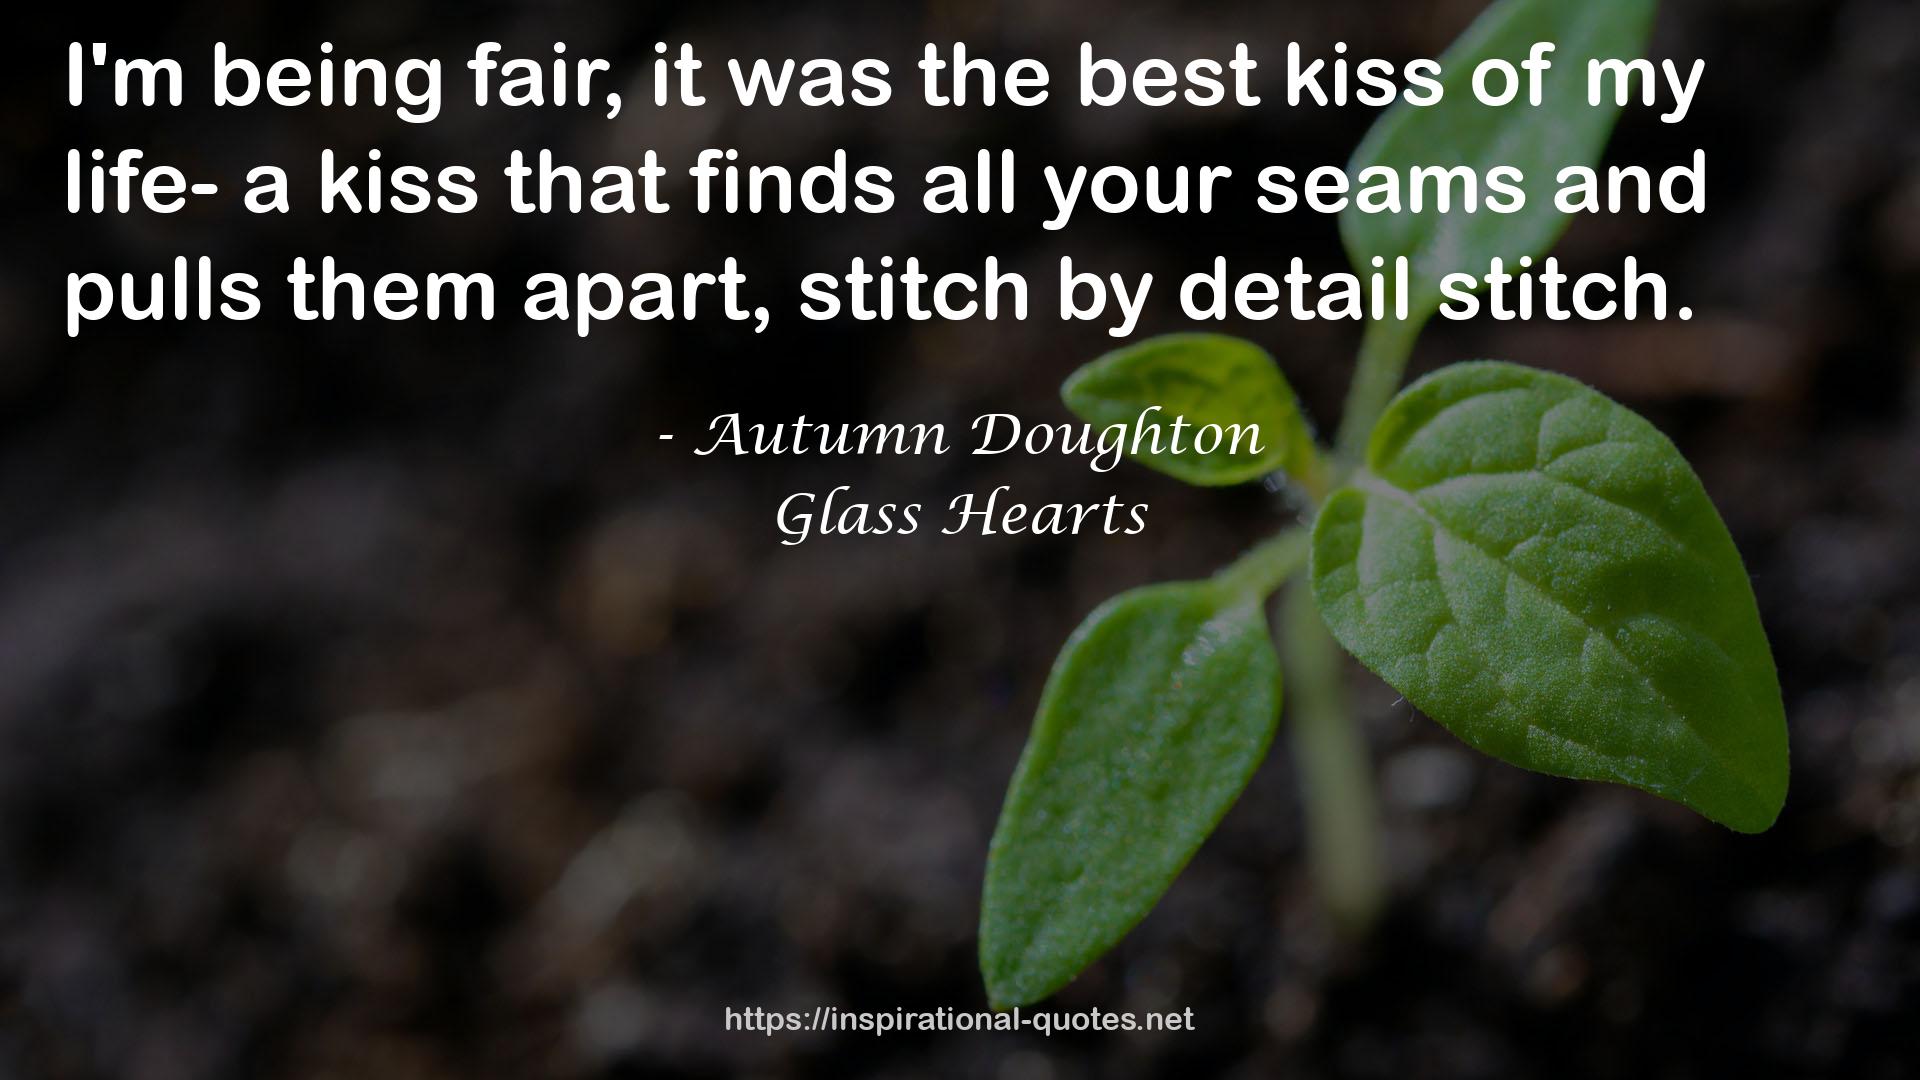 Glass Hearts QUOTES